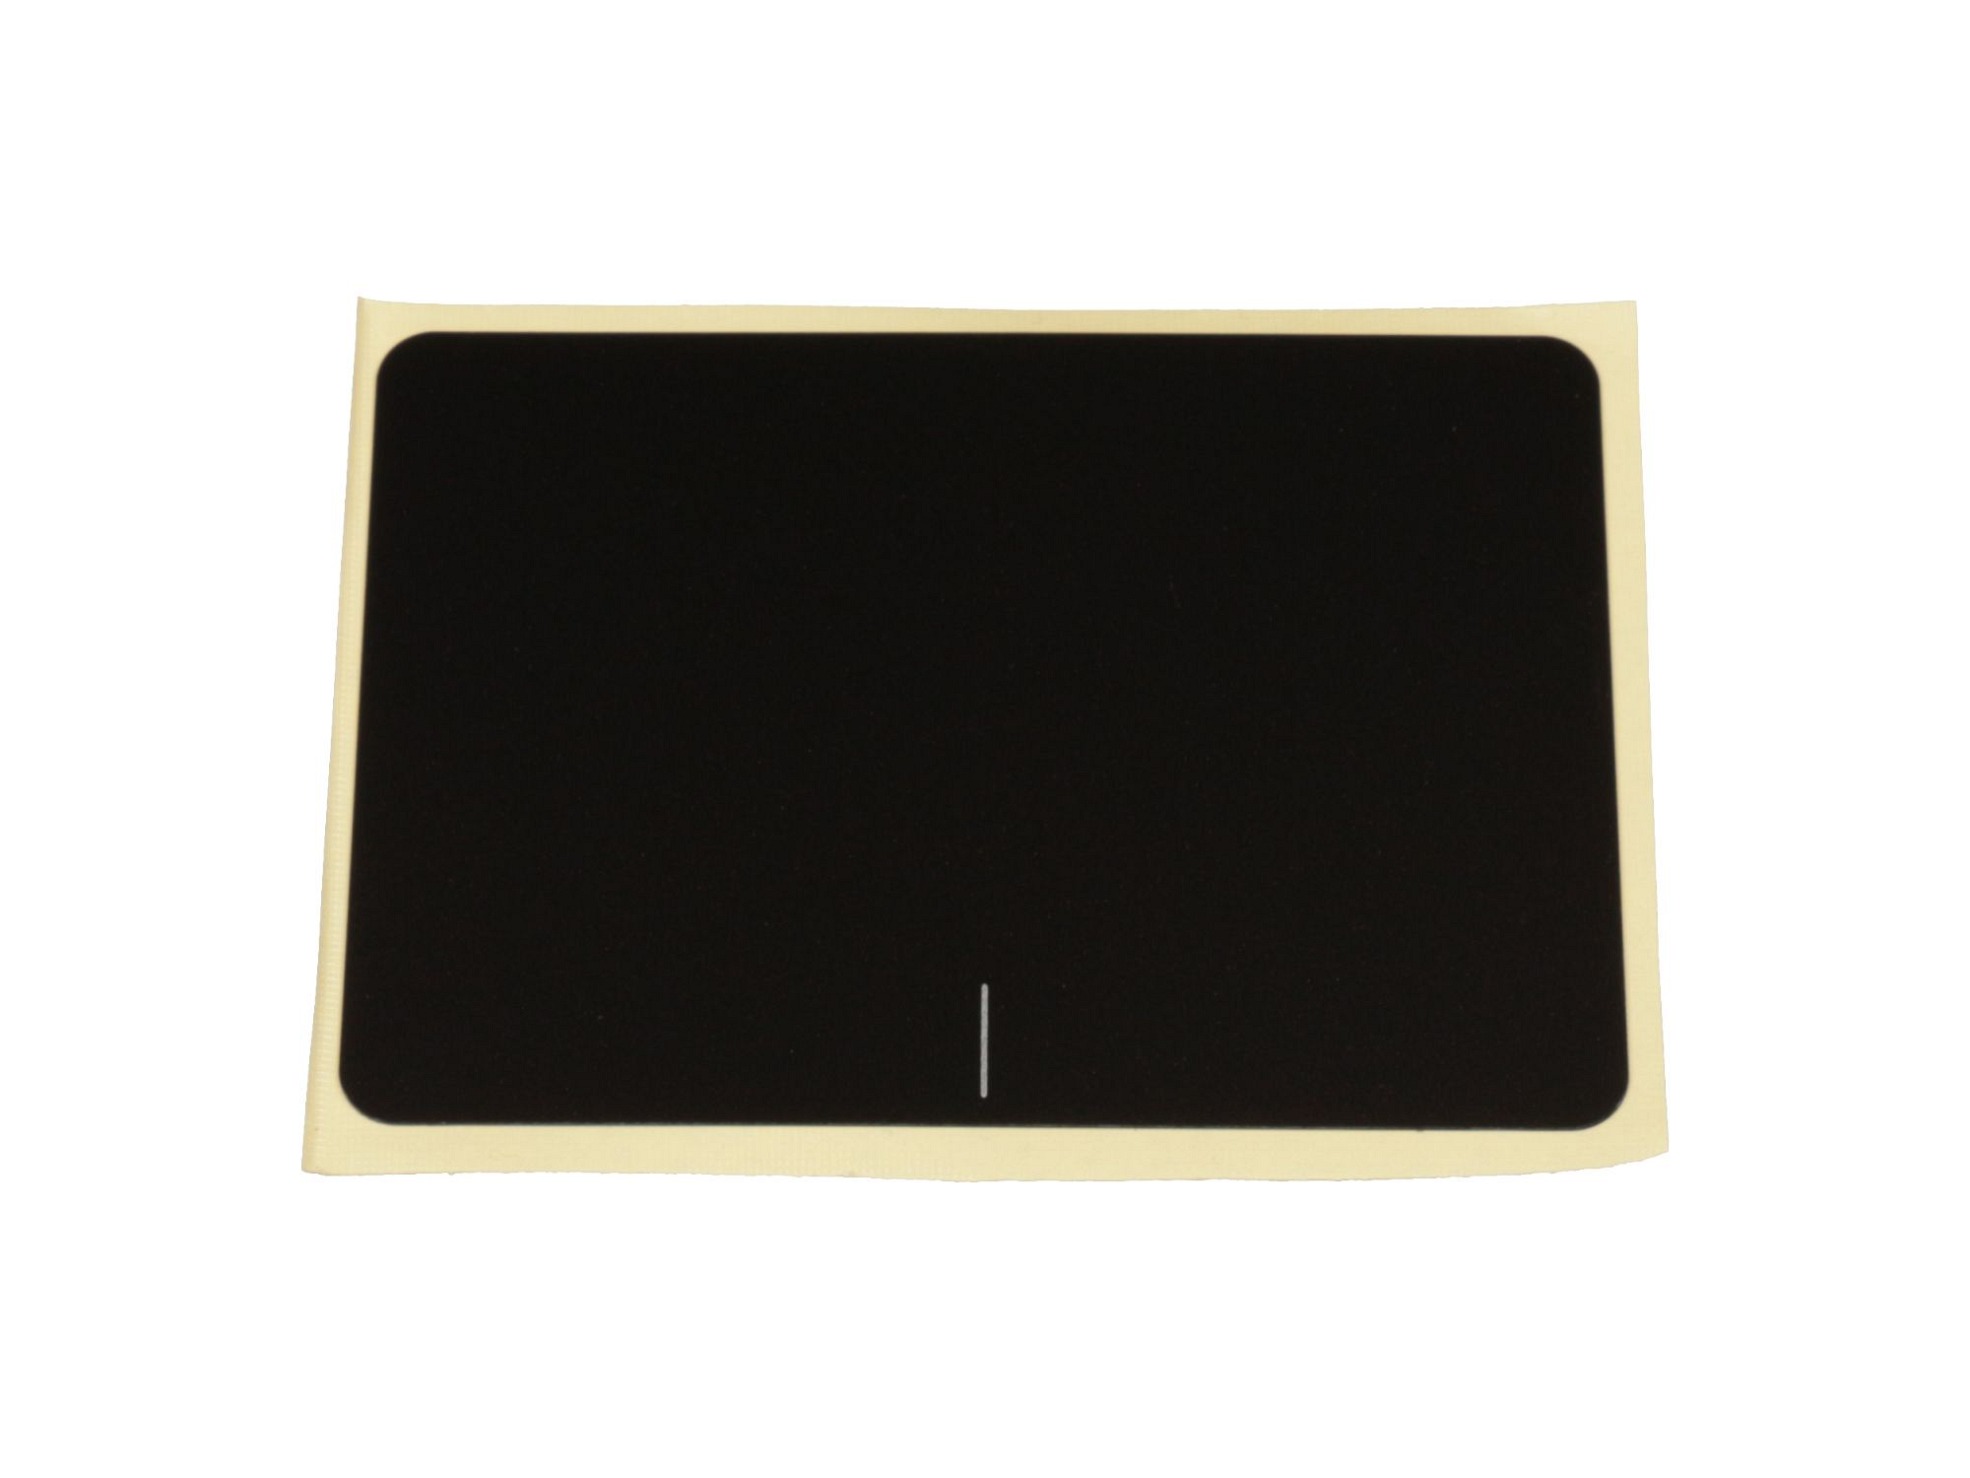 Touchpad-Cover für Asus R753UV